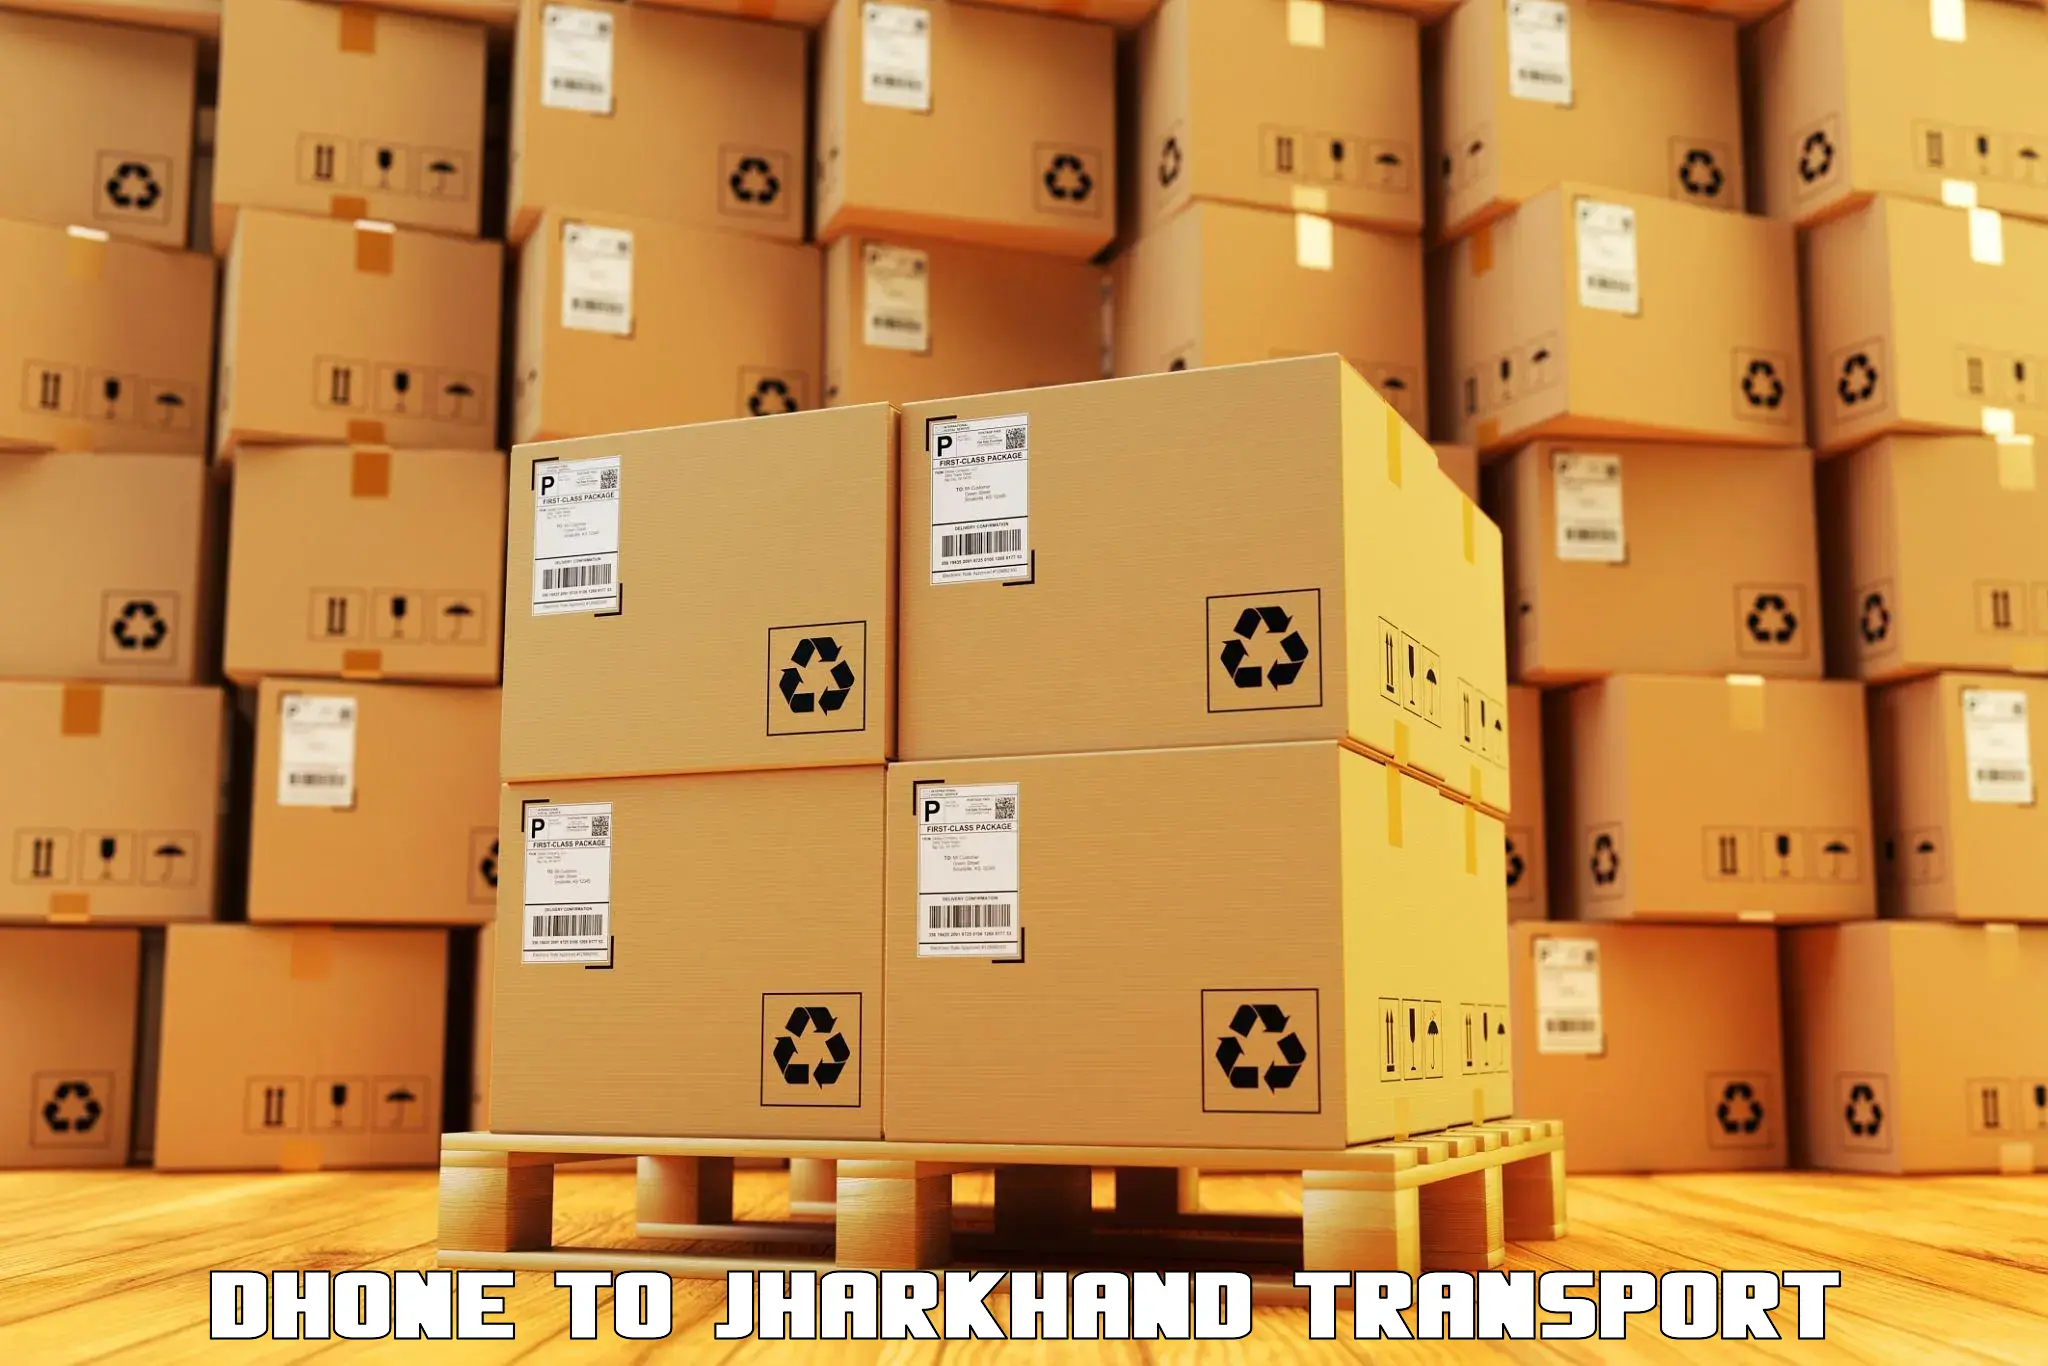 Transport shared services Dhone to Jamshedpur